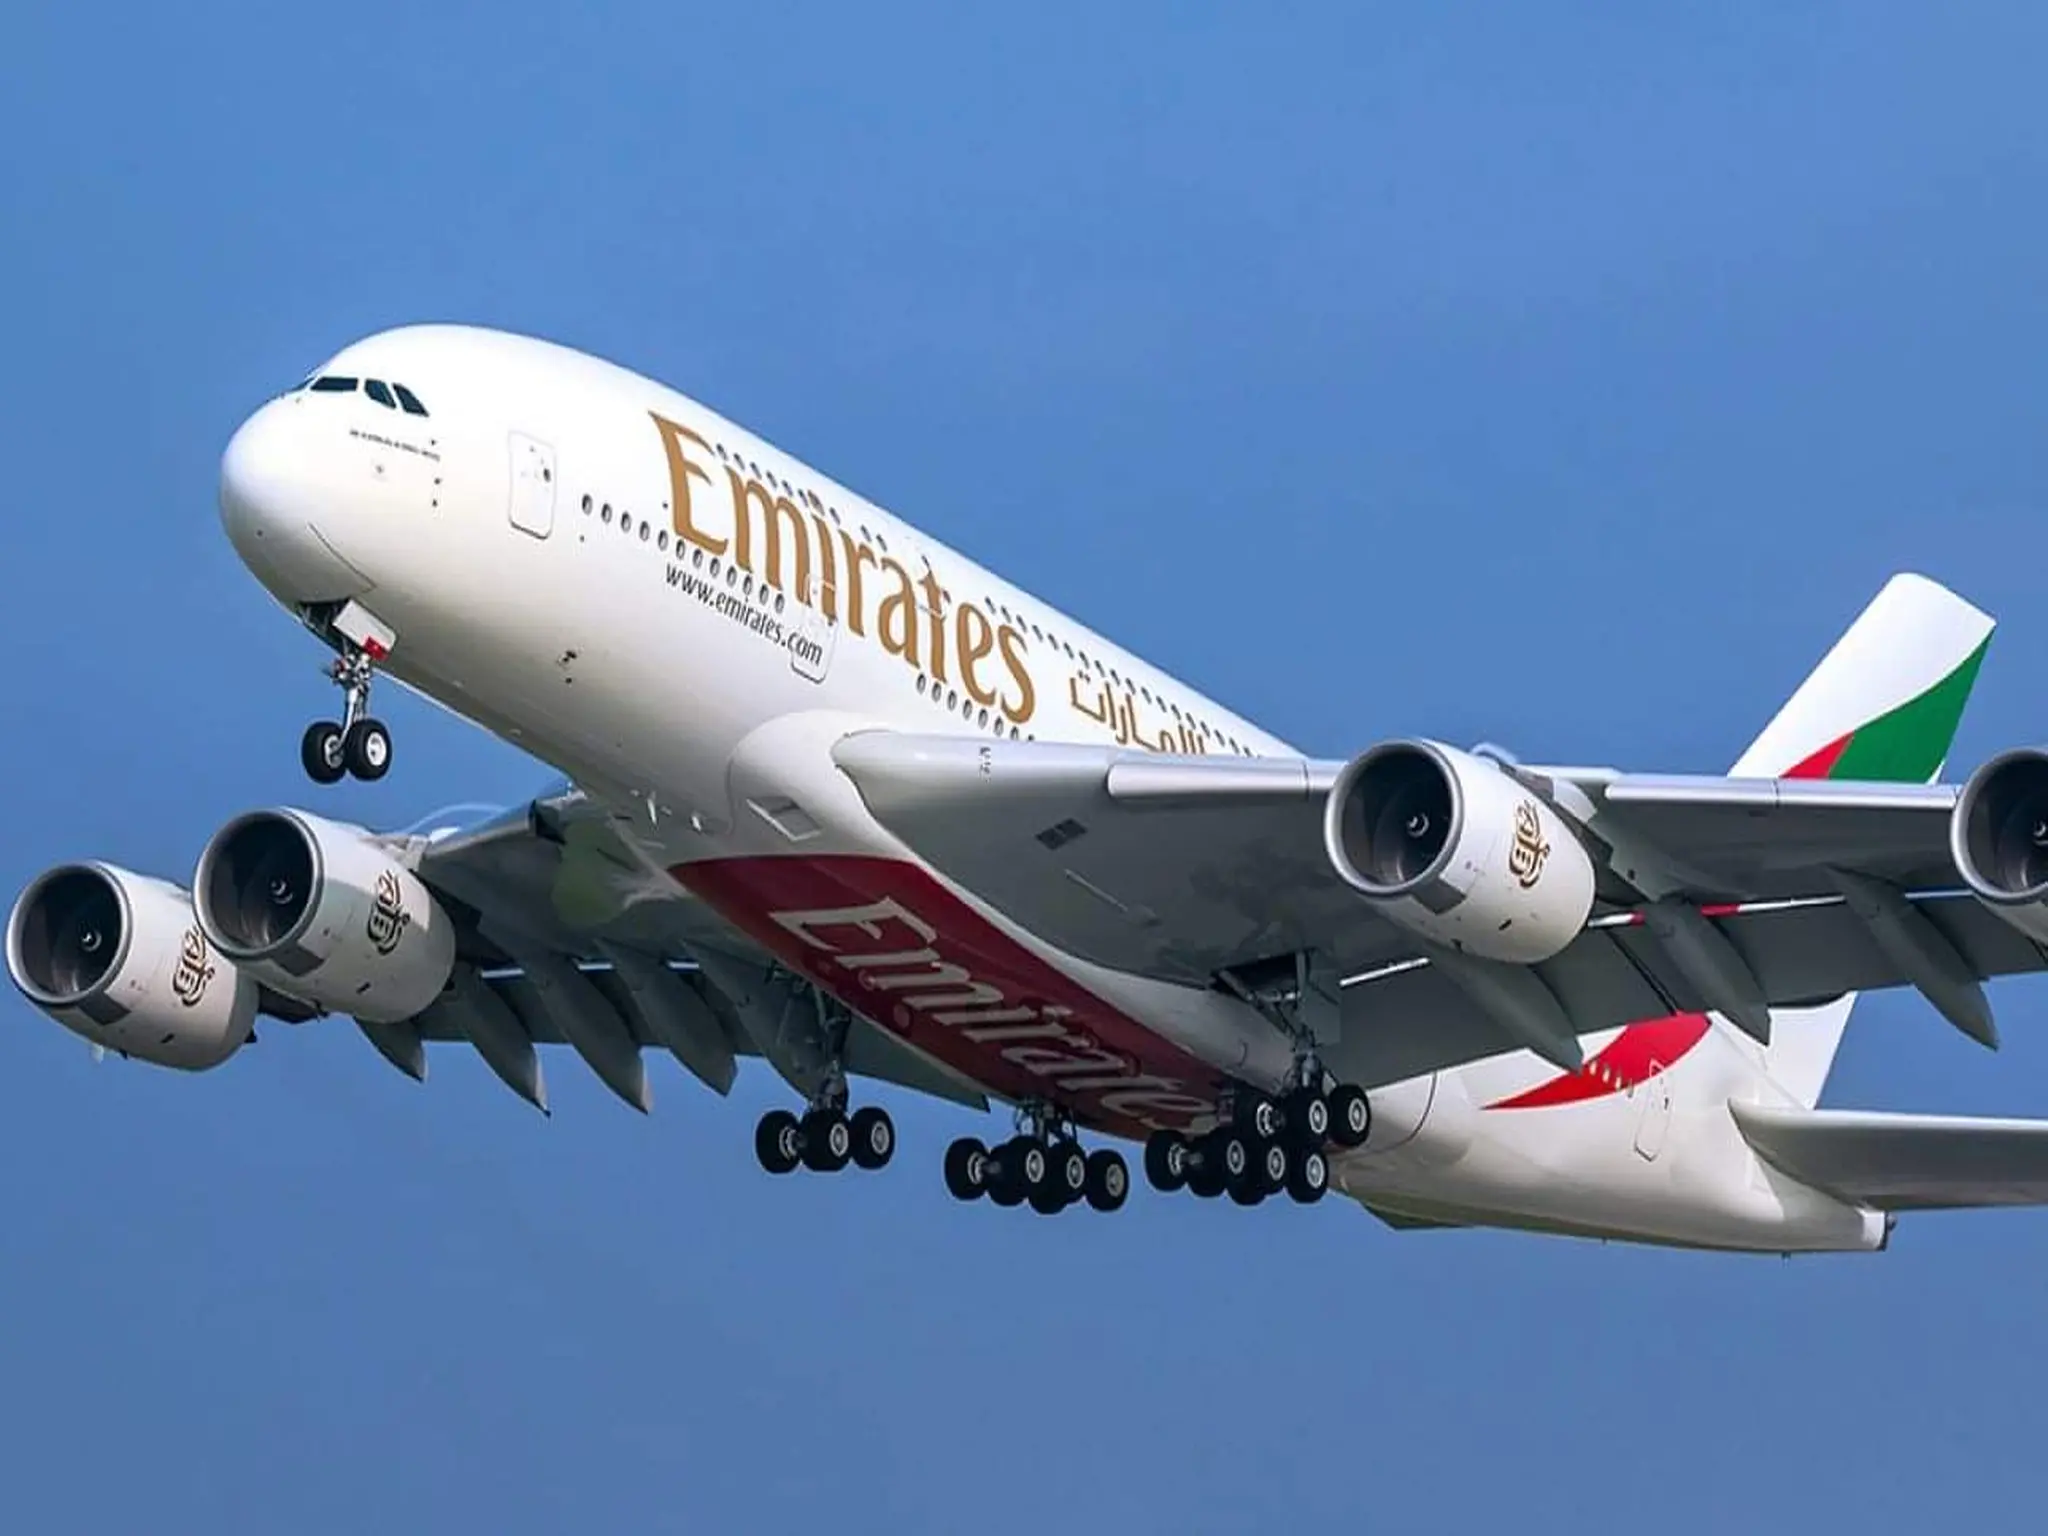 A decision from Emirates Airlines will take effect next May